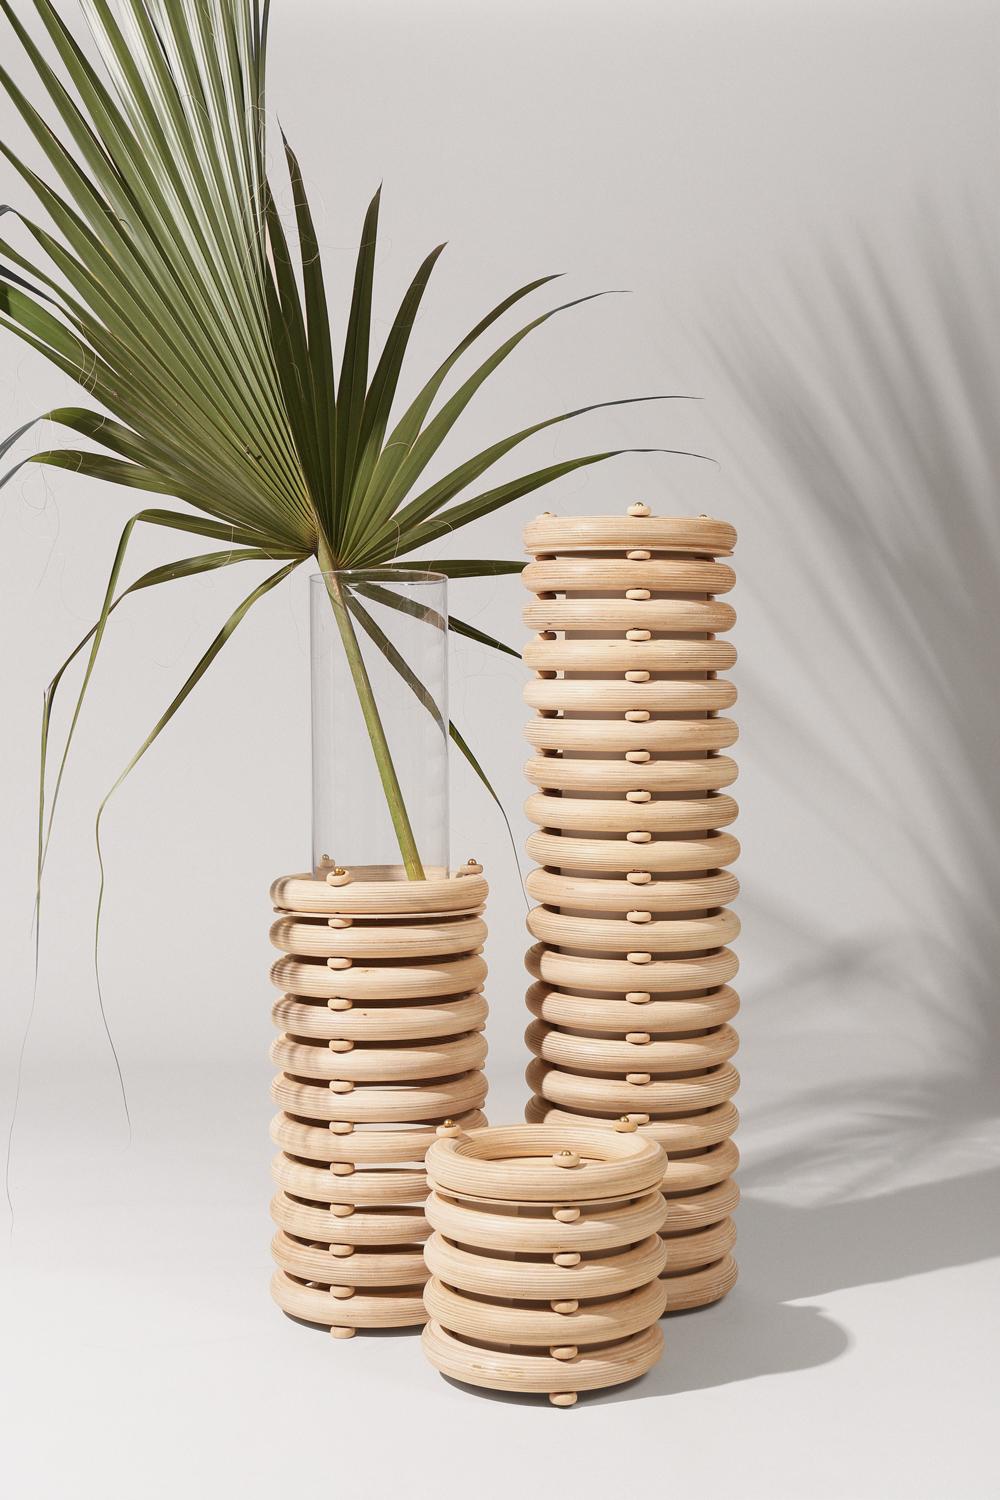 Made to order. Please allow six weeks for production.

The Echo family of sculptural totems pairs tropical warmth with minimalist appeal. Made of stacked finely finished birch, the totems have an architectural rigidity and a soft visual appeal.